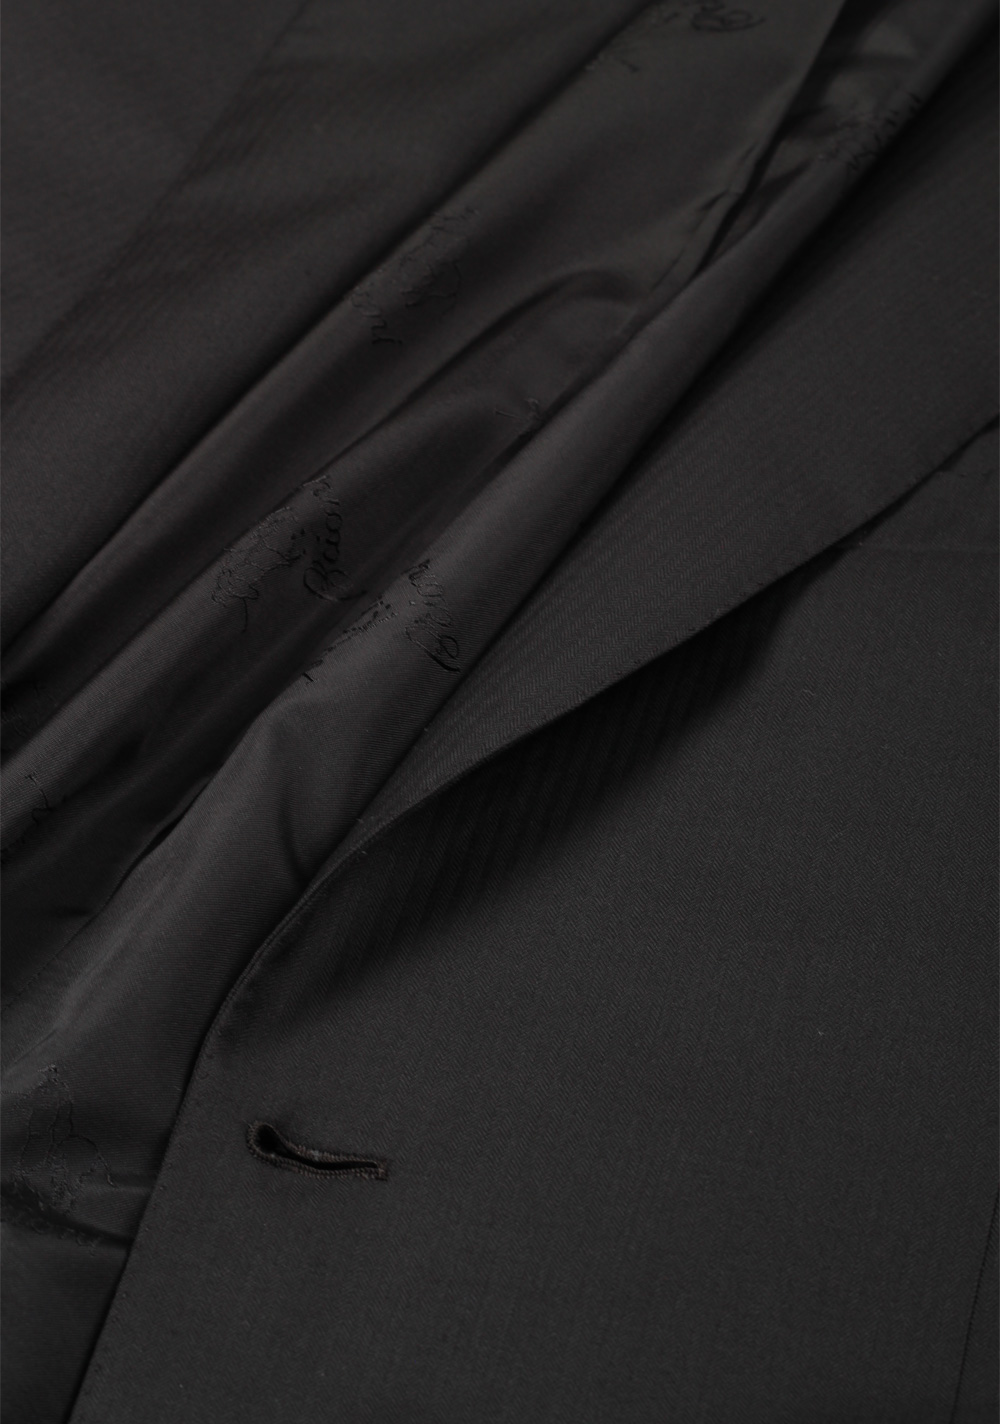 Brioni Colosseo Charcoal Suit Size 50 / 40R U.S. In Wool Super 150s | Costume Limité